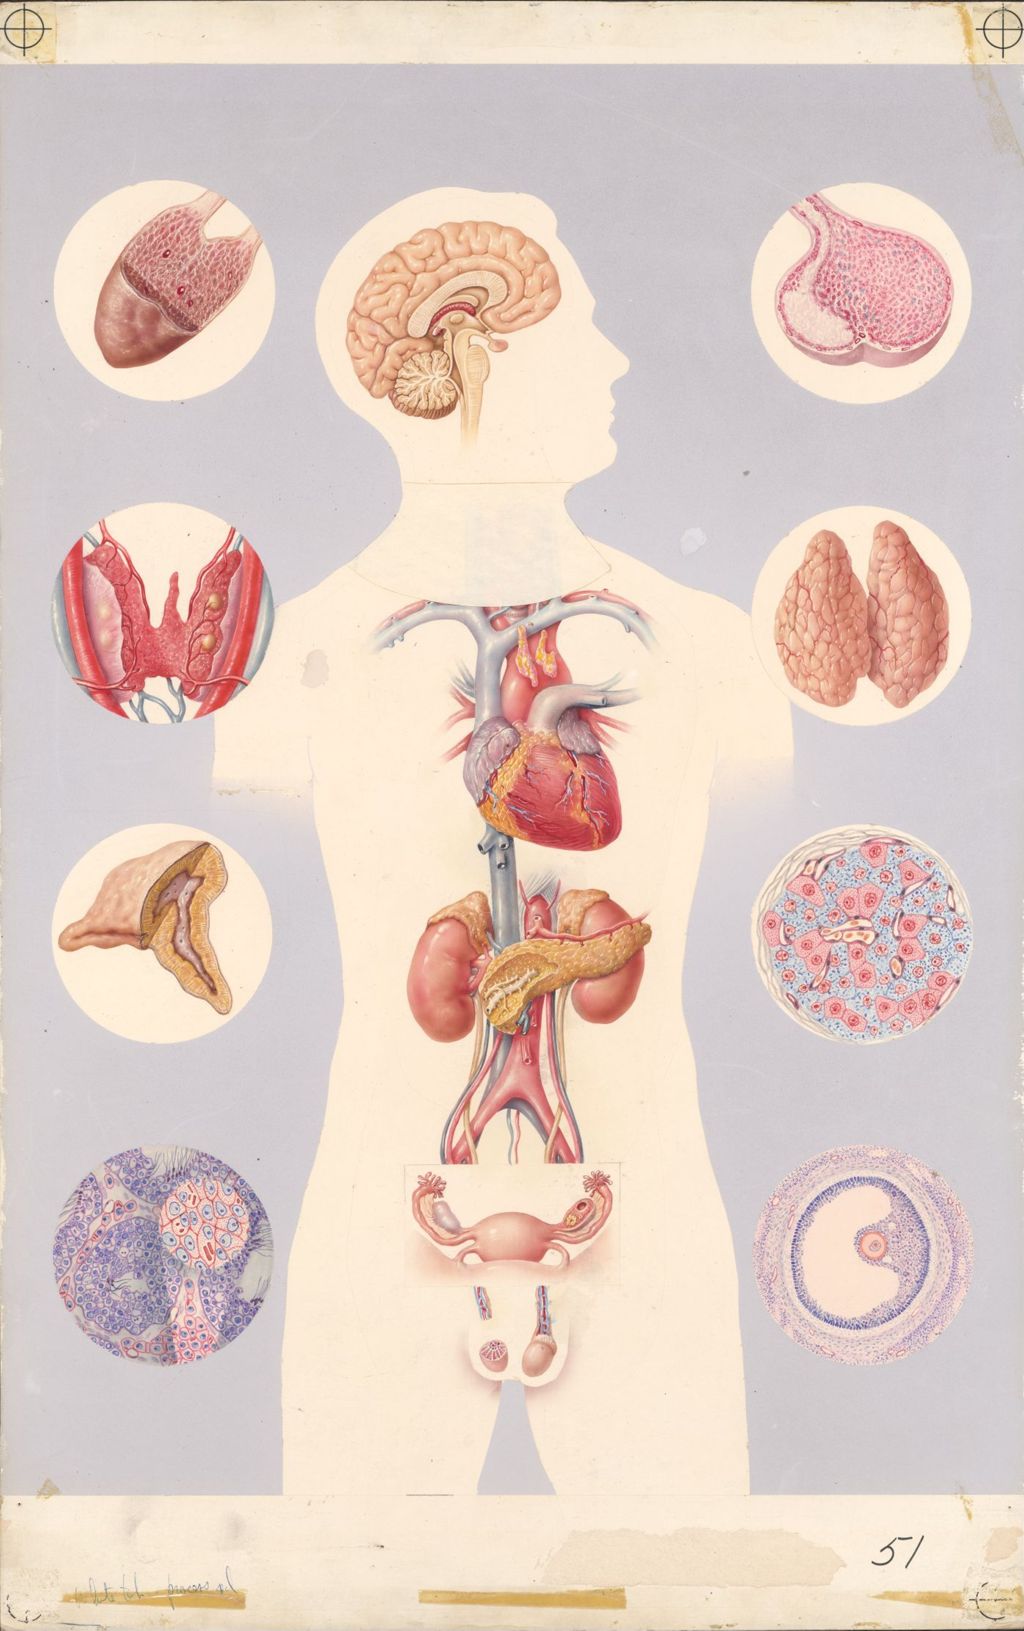 Medical Profiles, The Endocrine System